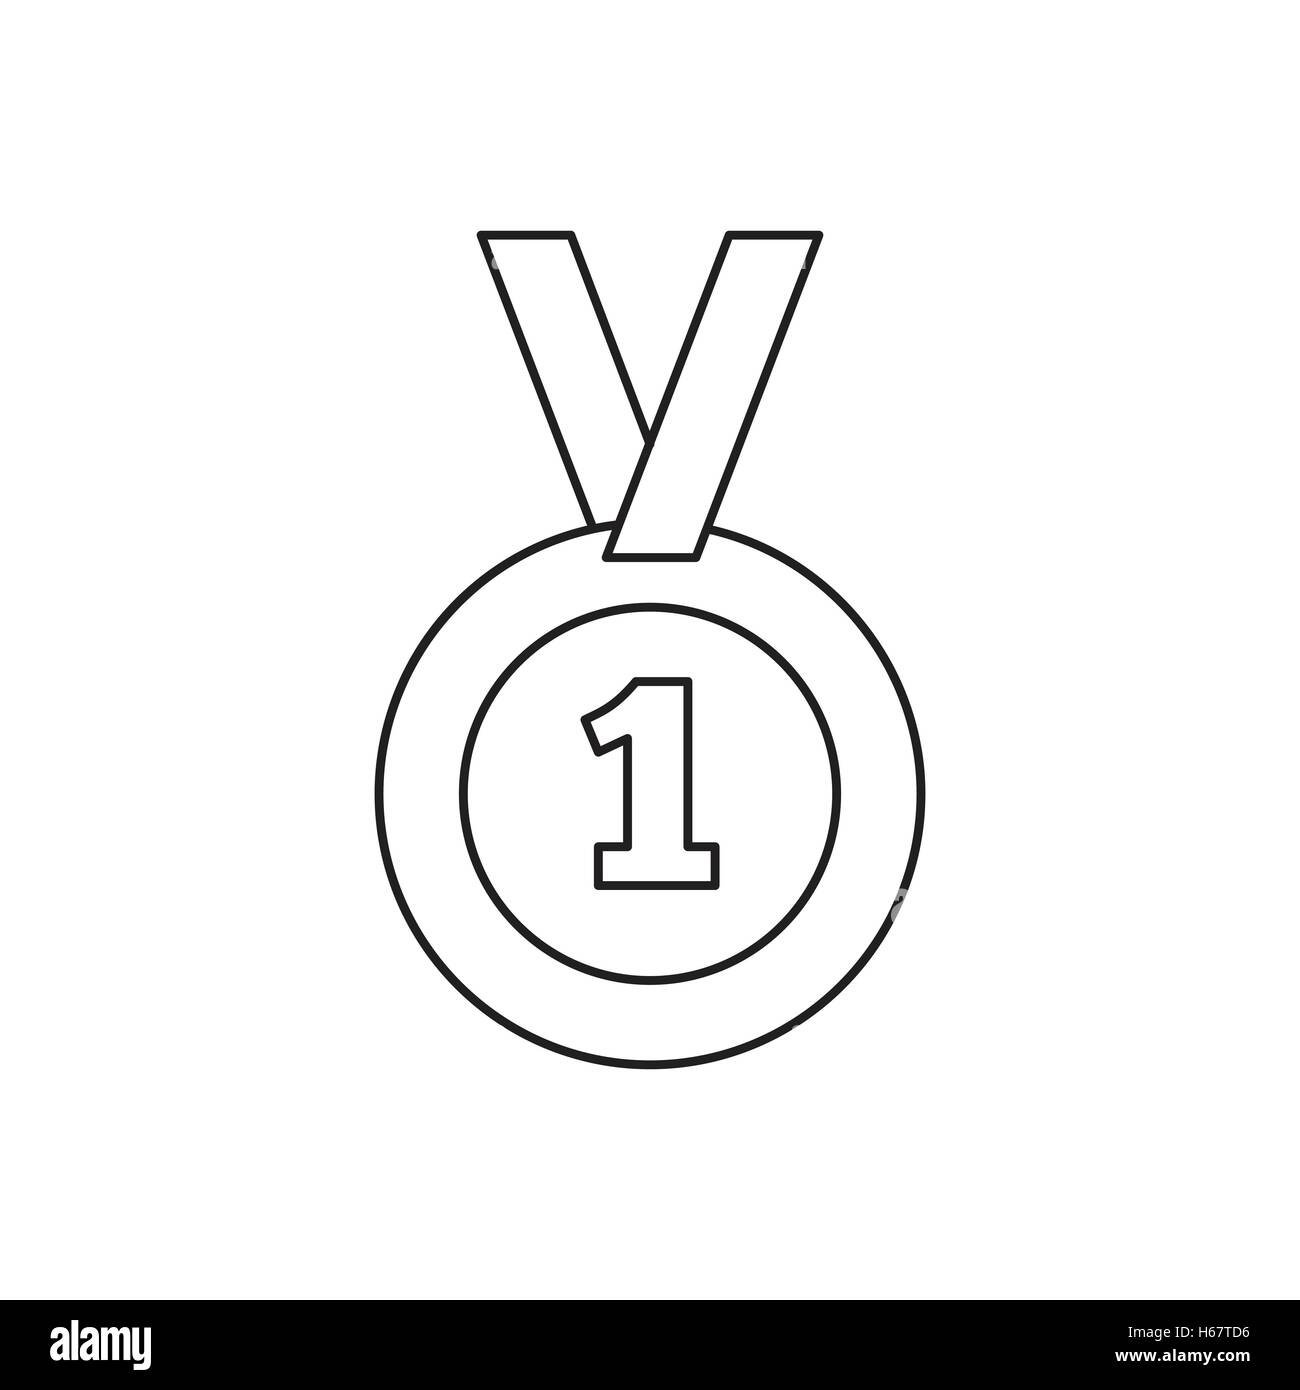 1st place medal line icon Stock Vector